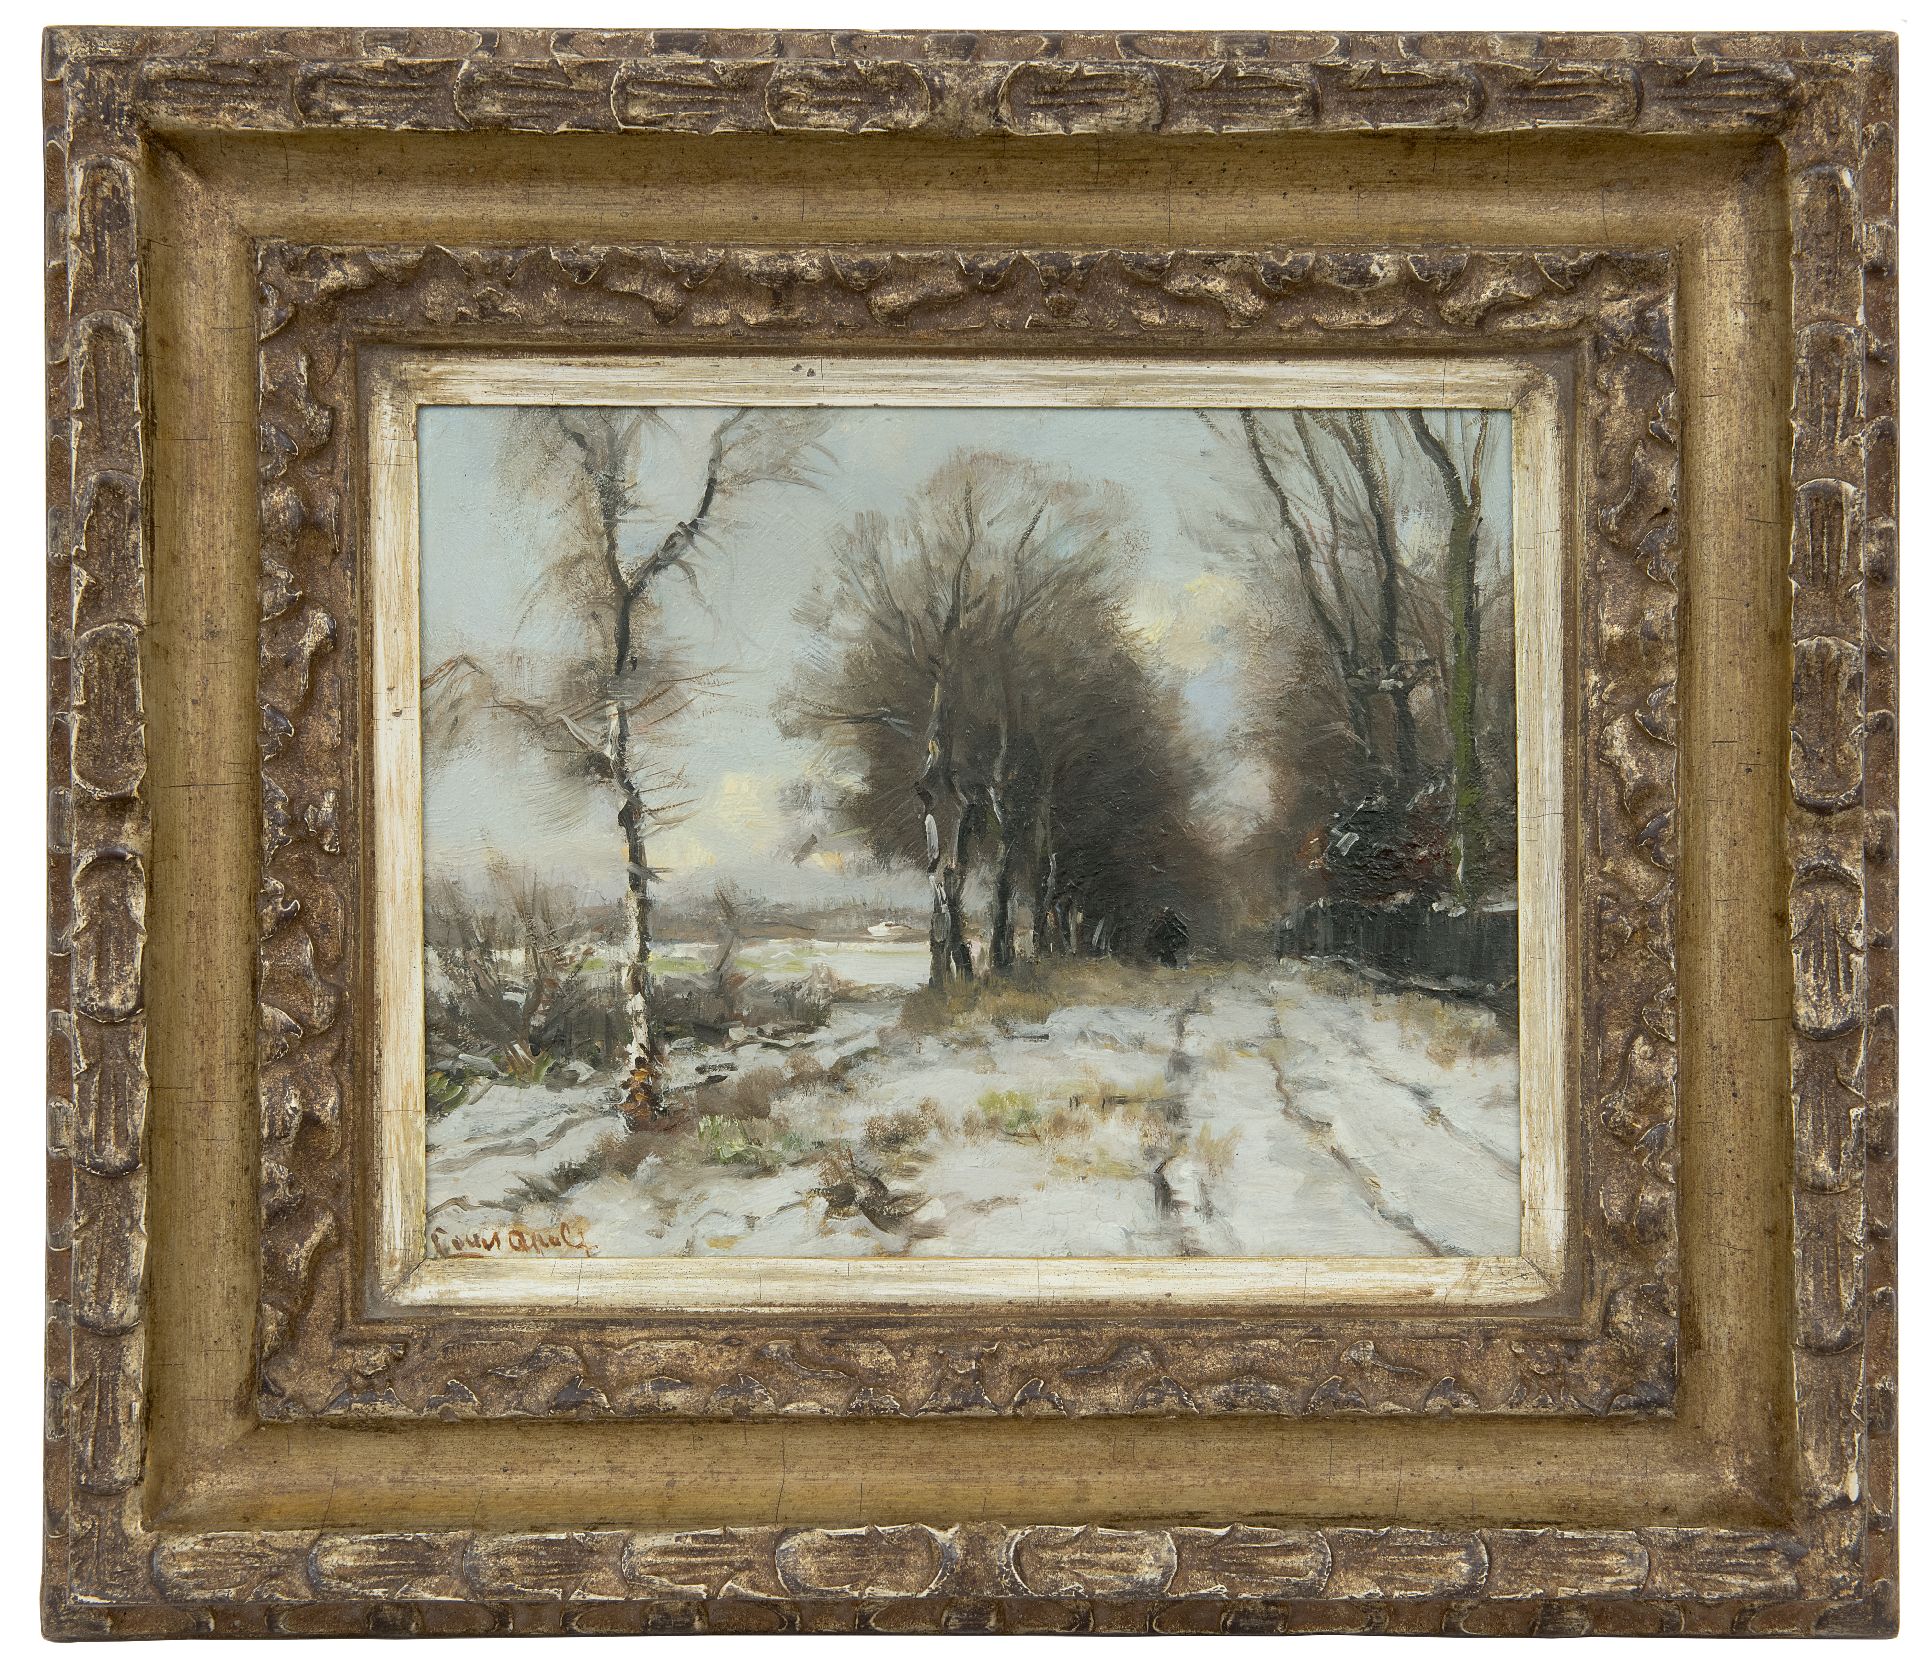 Louis Apol | Paintings prev. for Sale | Wood gatherer on a snowy path